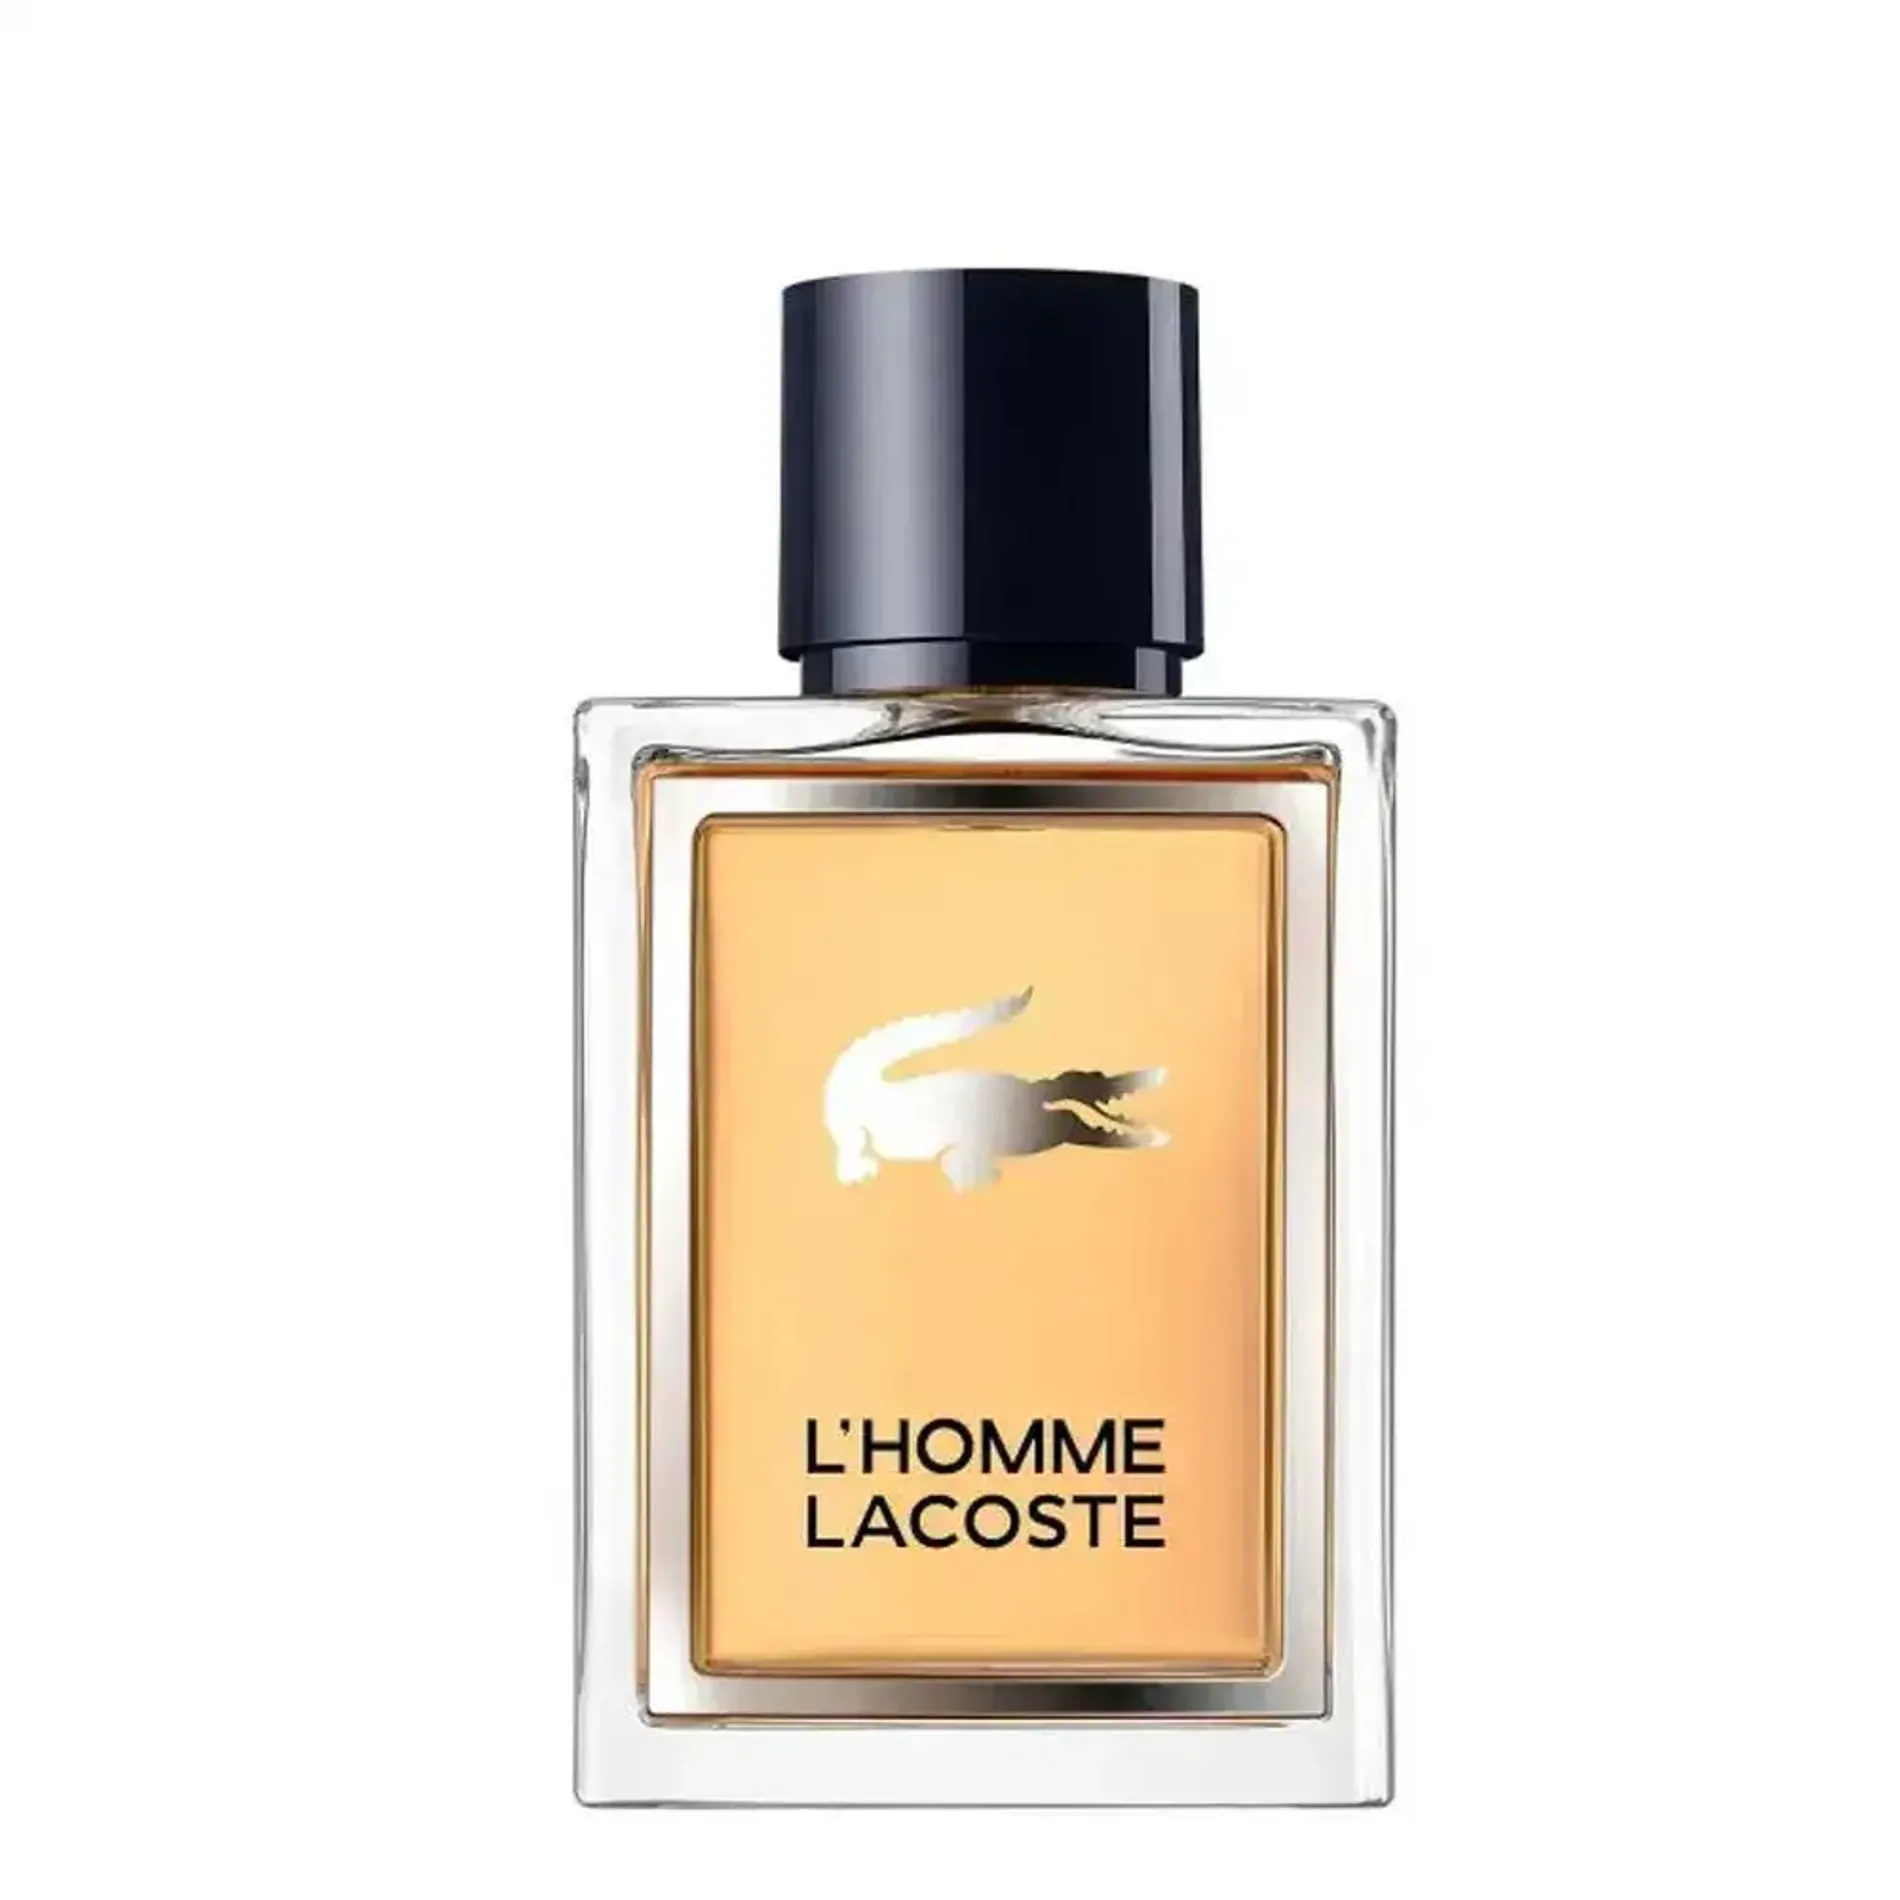 nuoc-hoa-cho-nam-gioi-lacoste-l-homme-edt-100ml-1